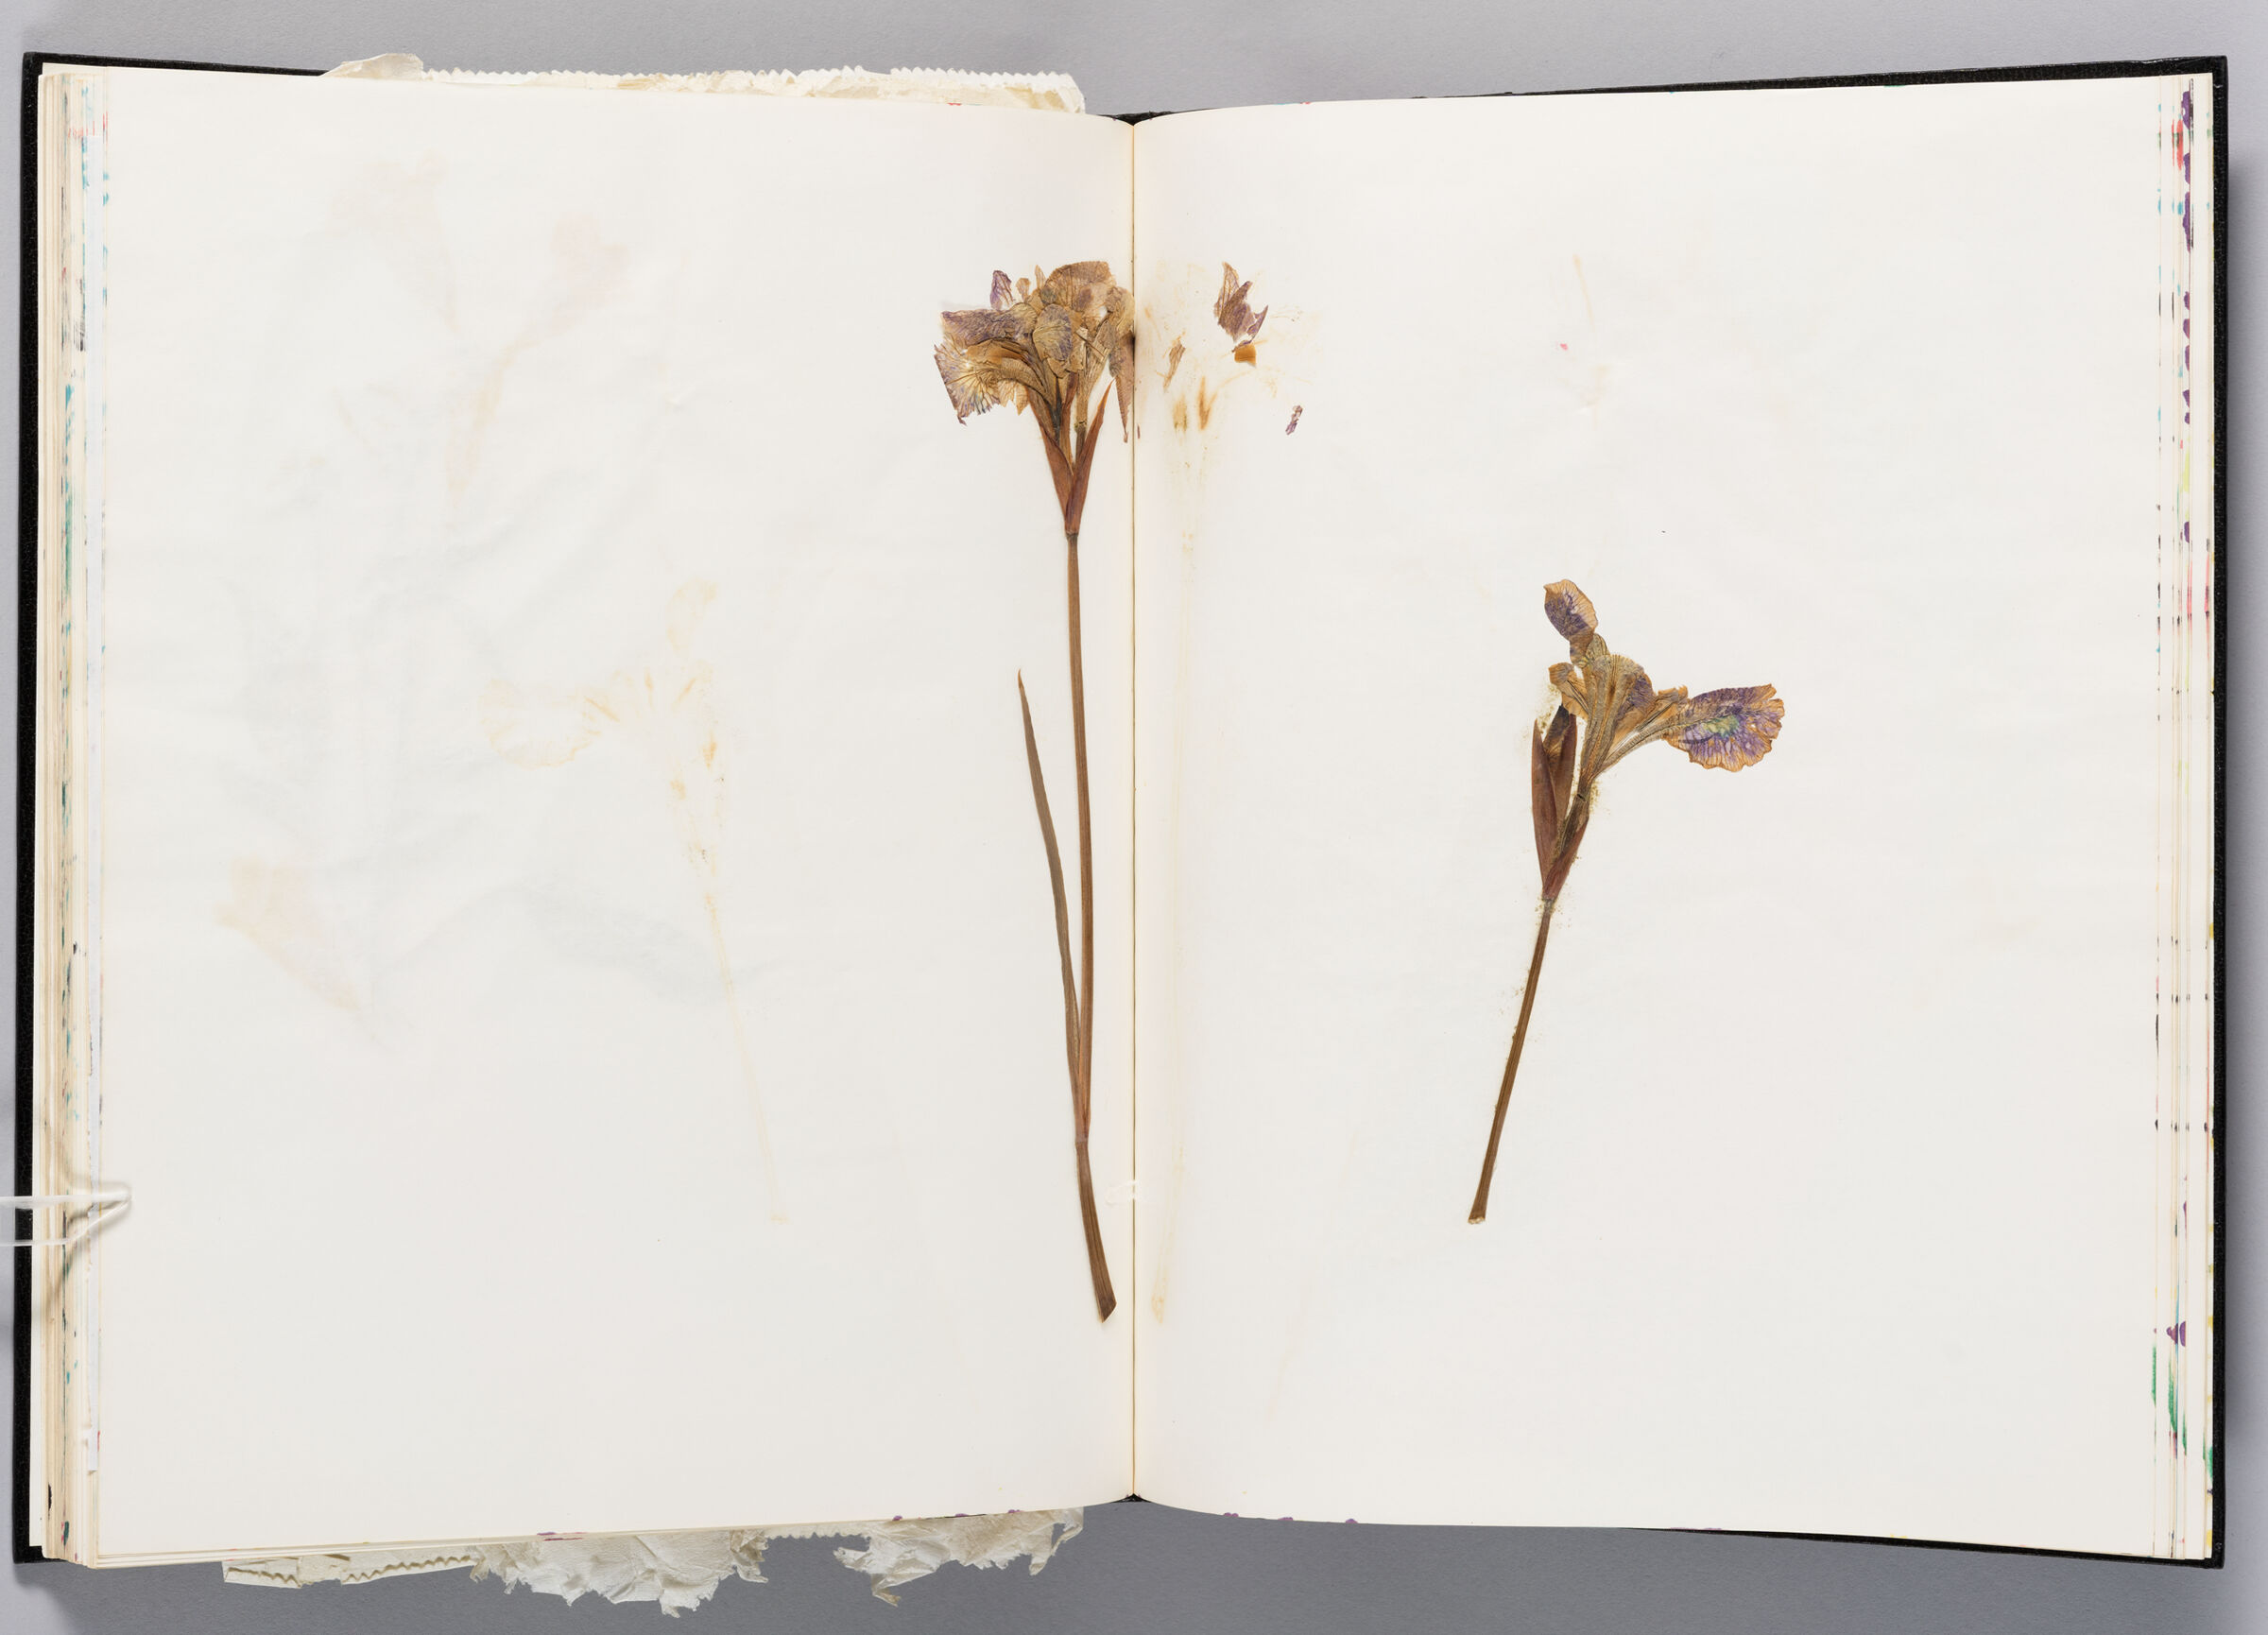 Untitled (Pressed Flower, Left Page); Untitled (Pressed Flower, Right Page)